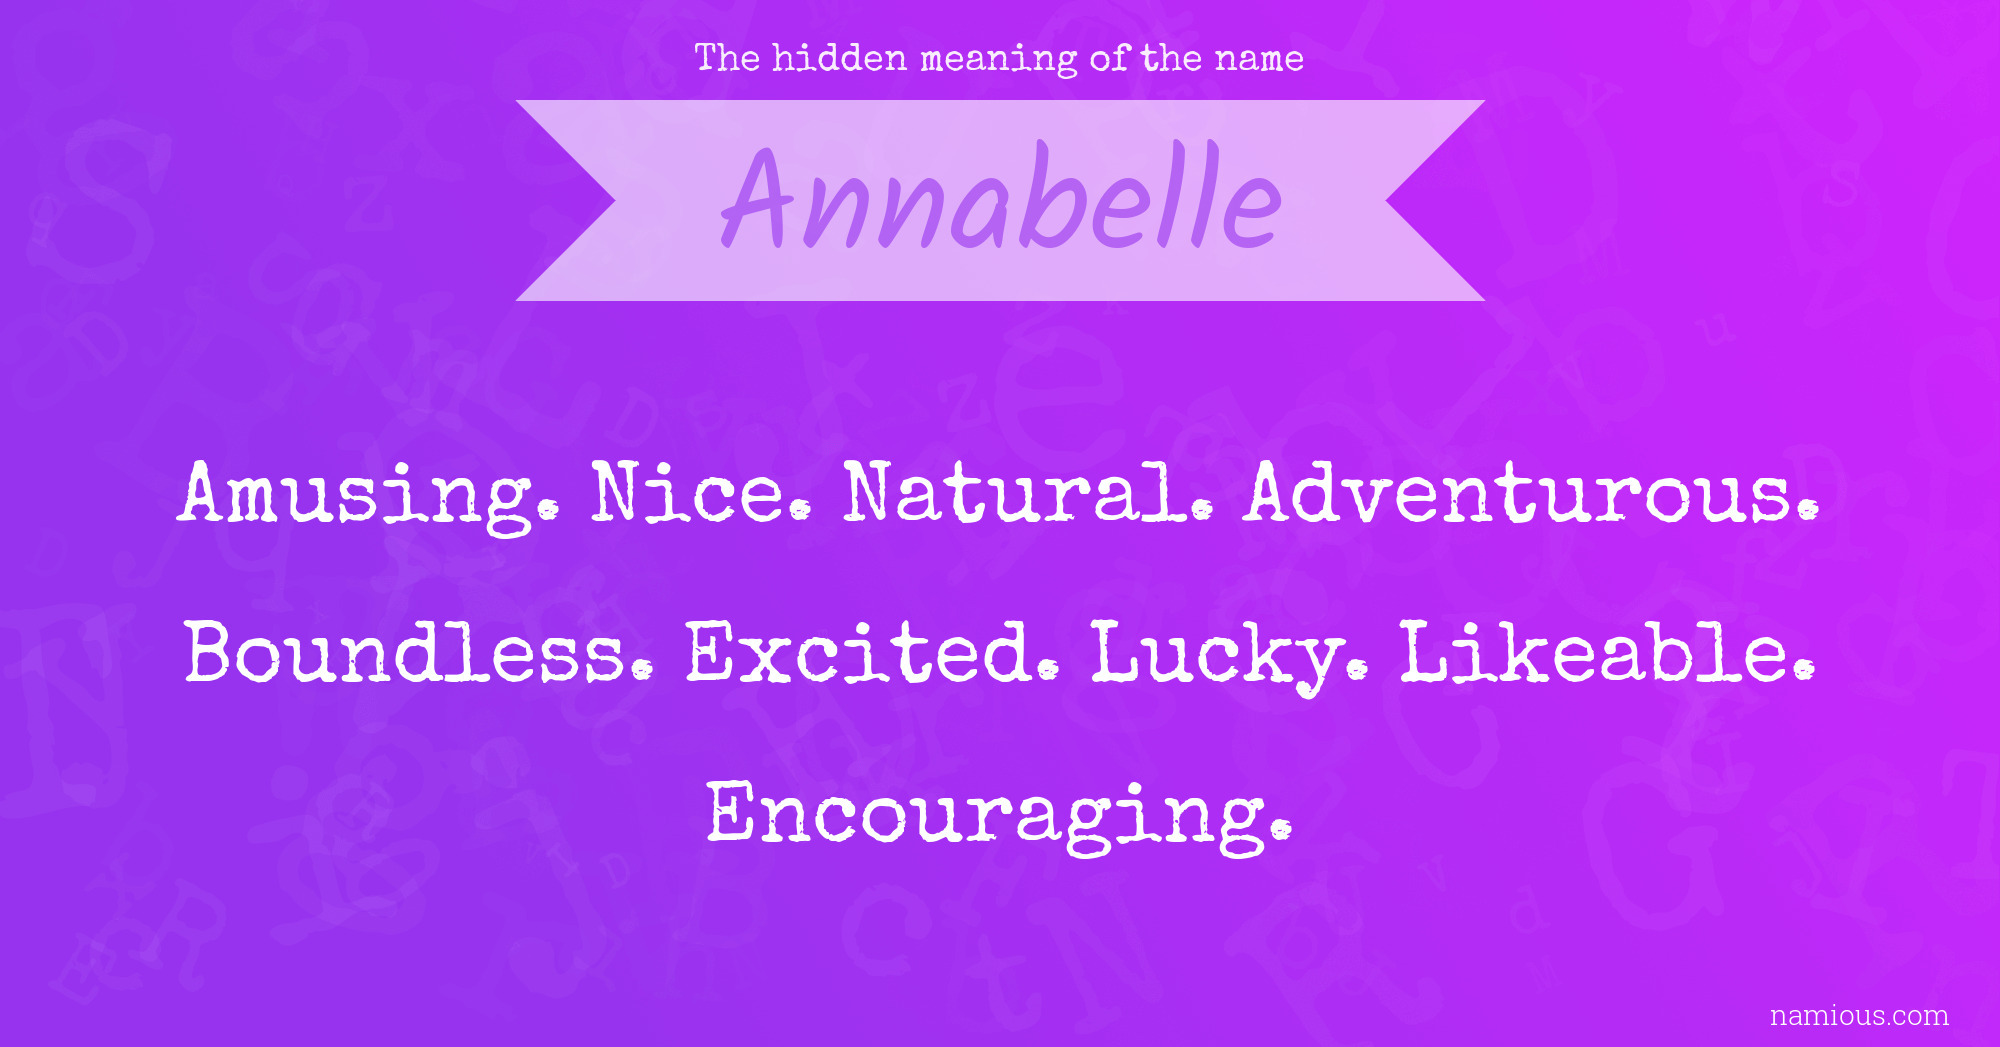 The hidden meaning of the name Annabelle